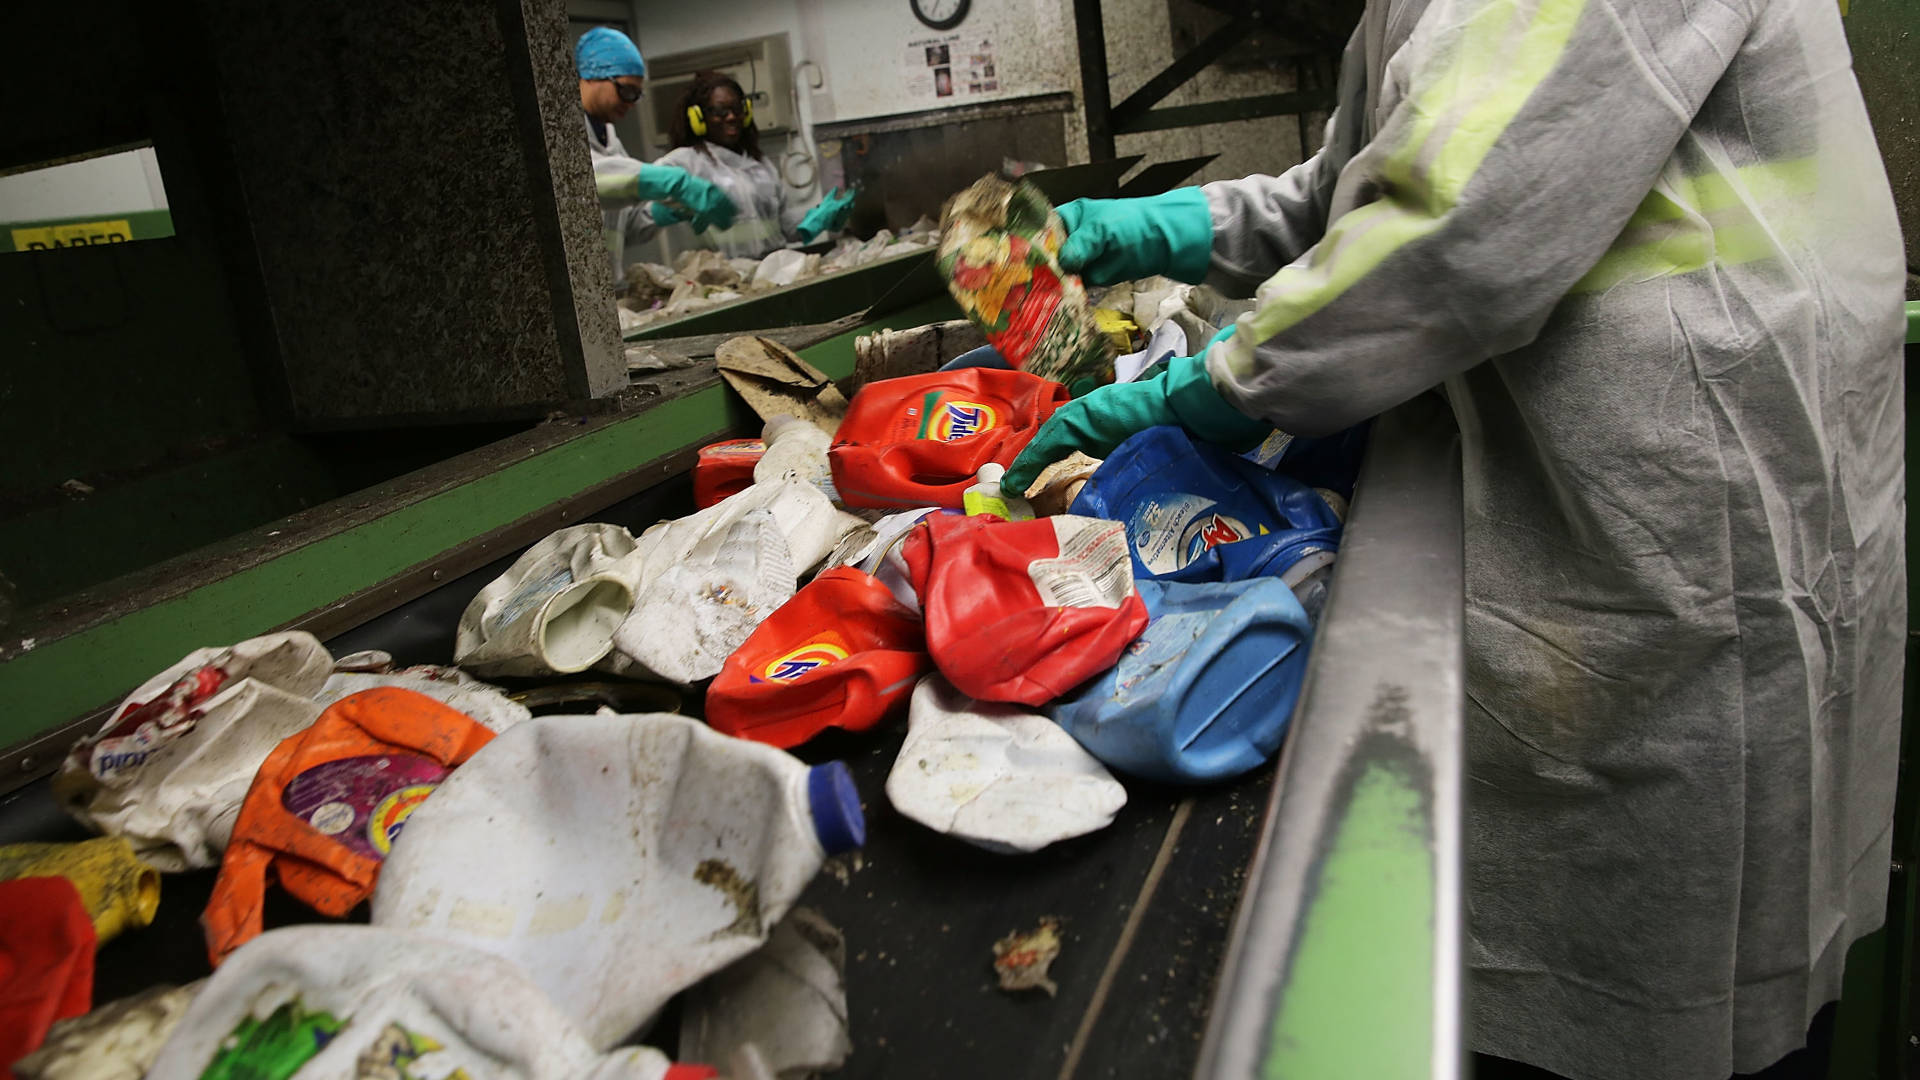 In 2015, recycling is sorted at the Sims Municipal Recycling Facility in New York City.